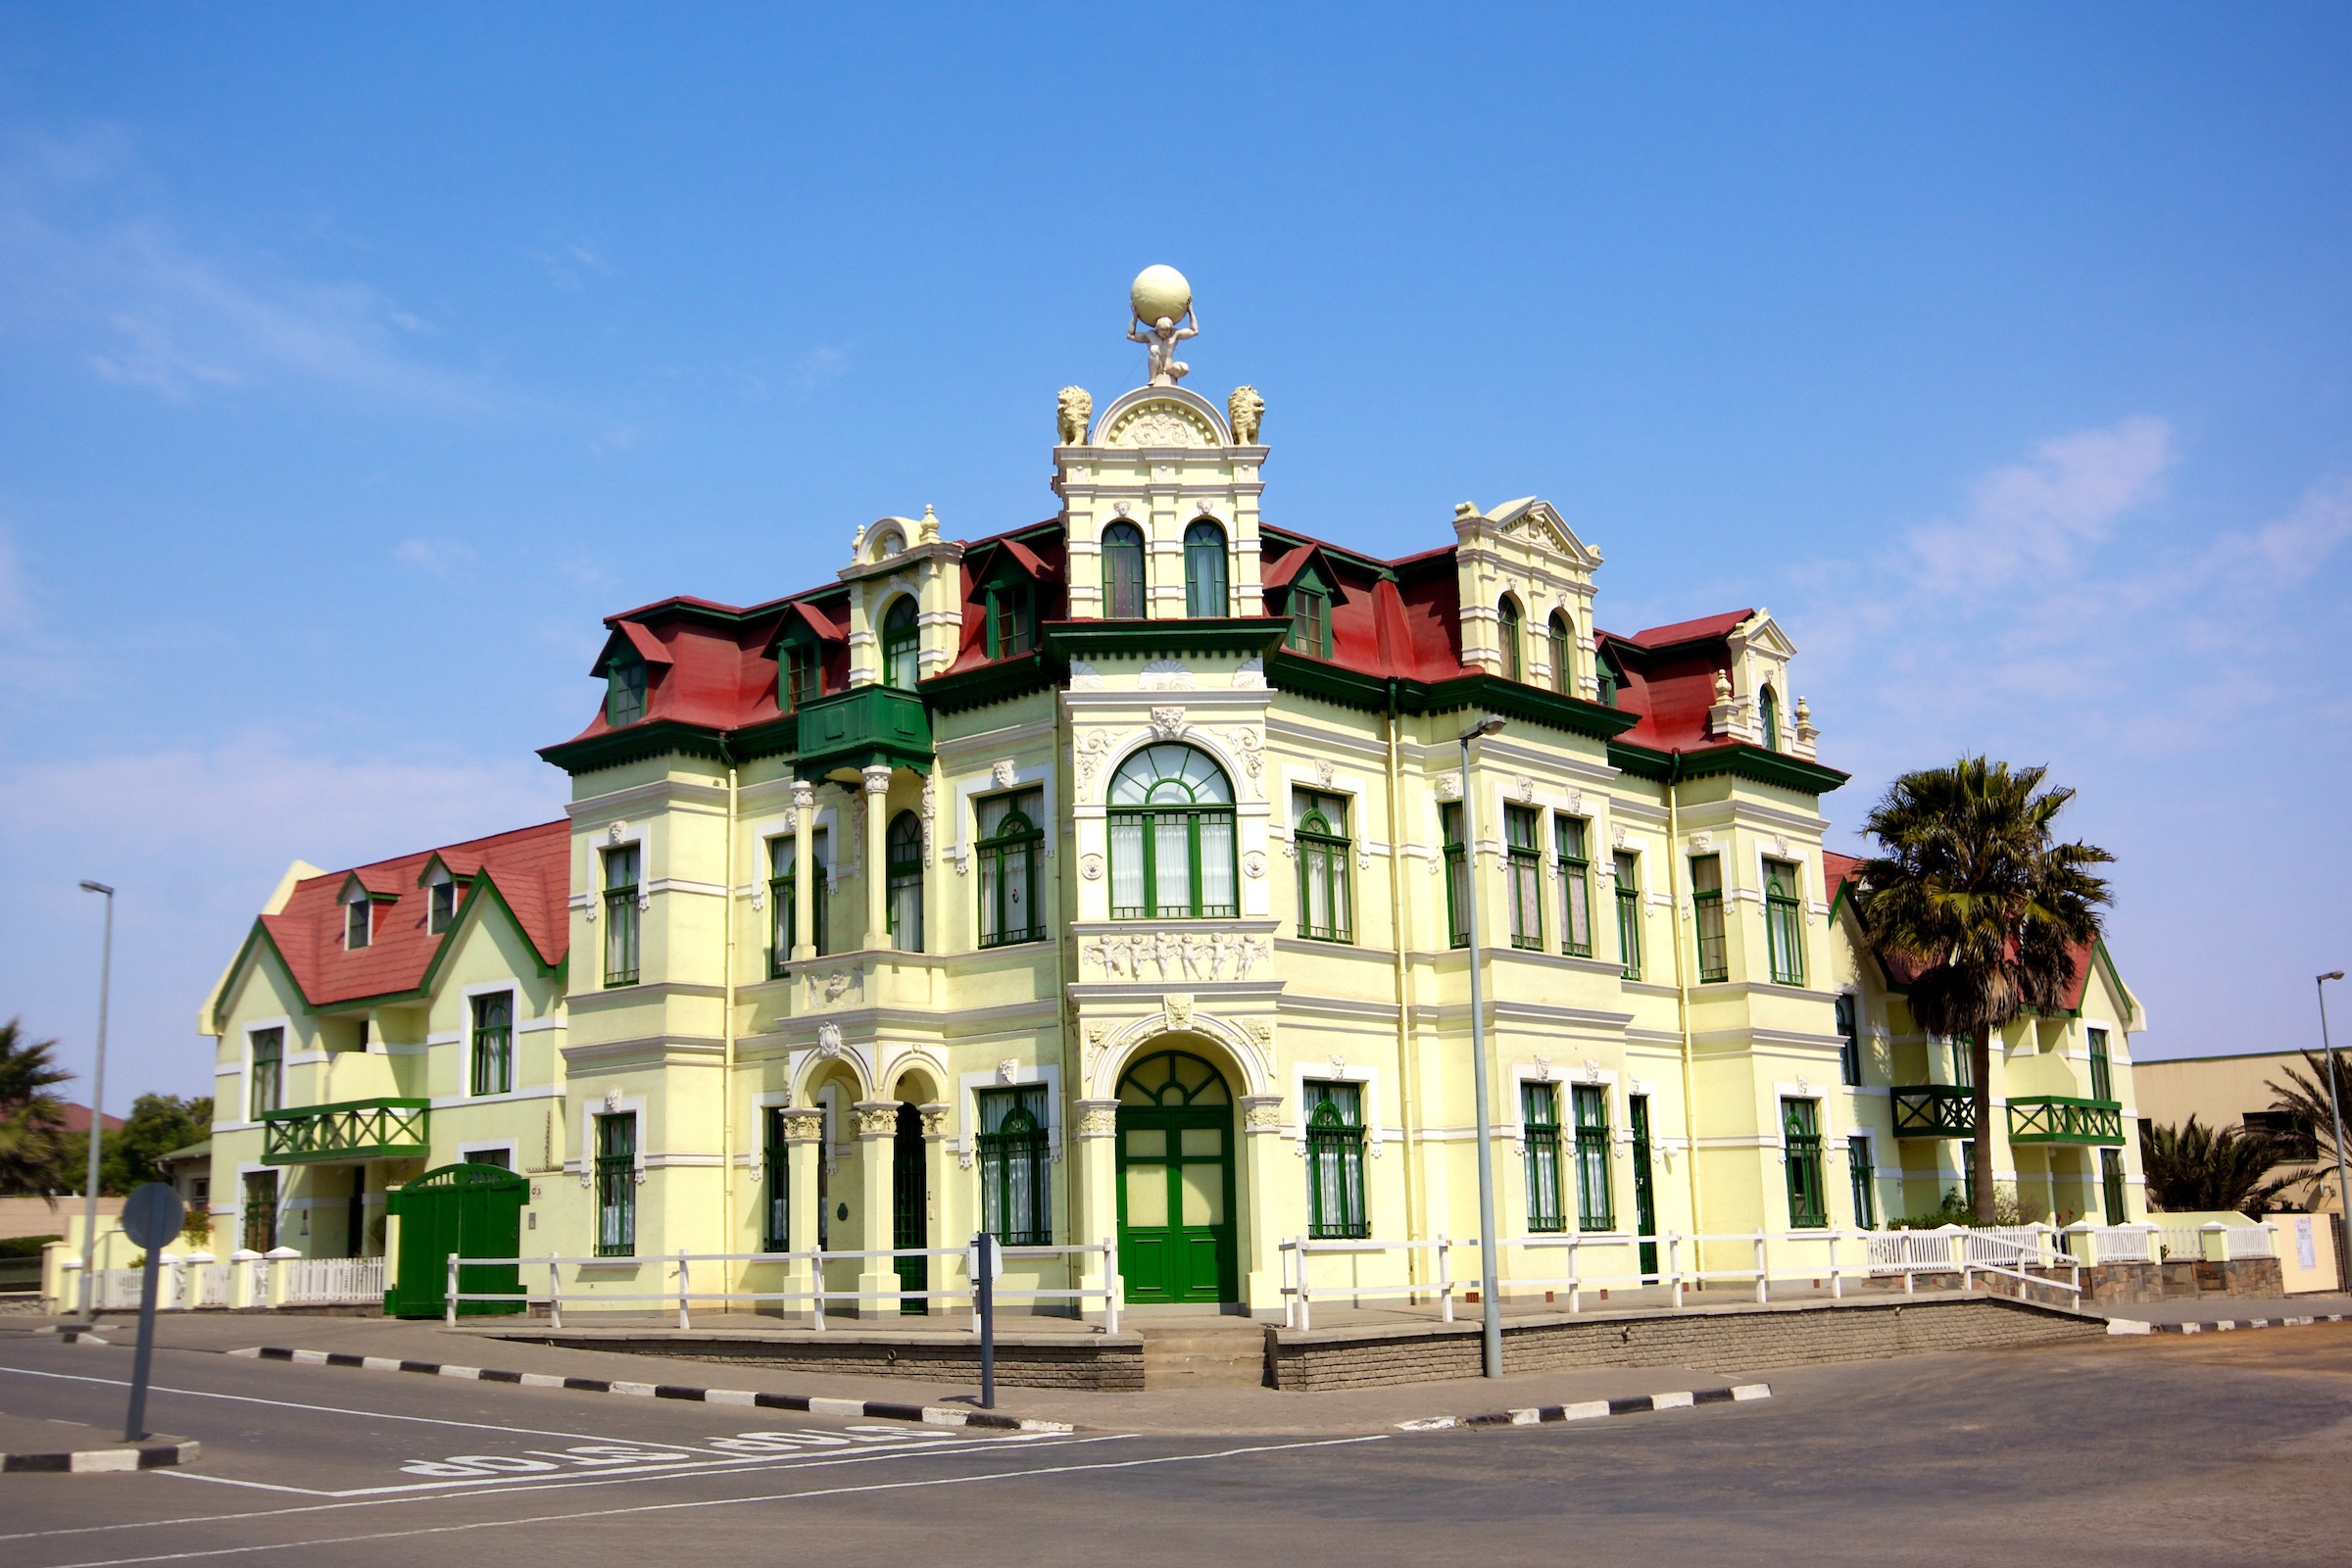 Swakopmund is arguably Namibia's prettiest coastal town and is marked by many beautiful German colonial buildings